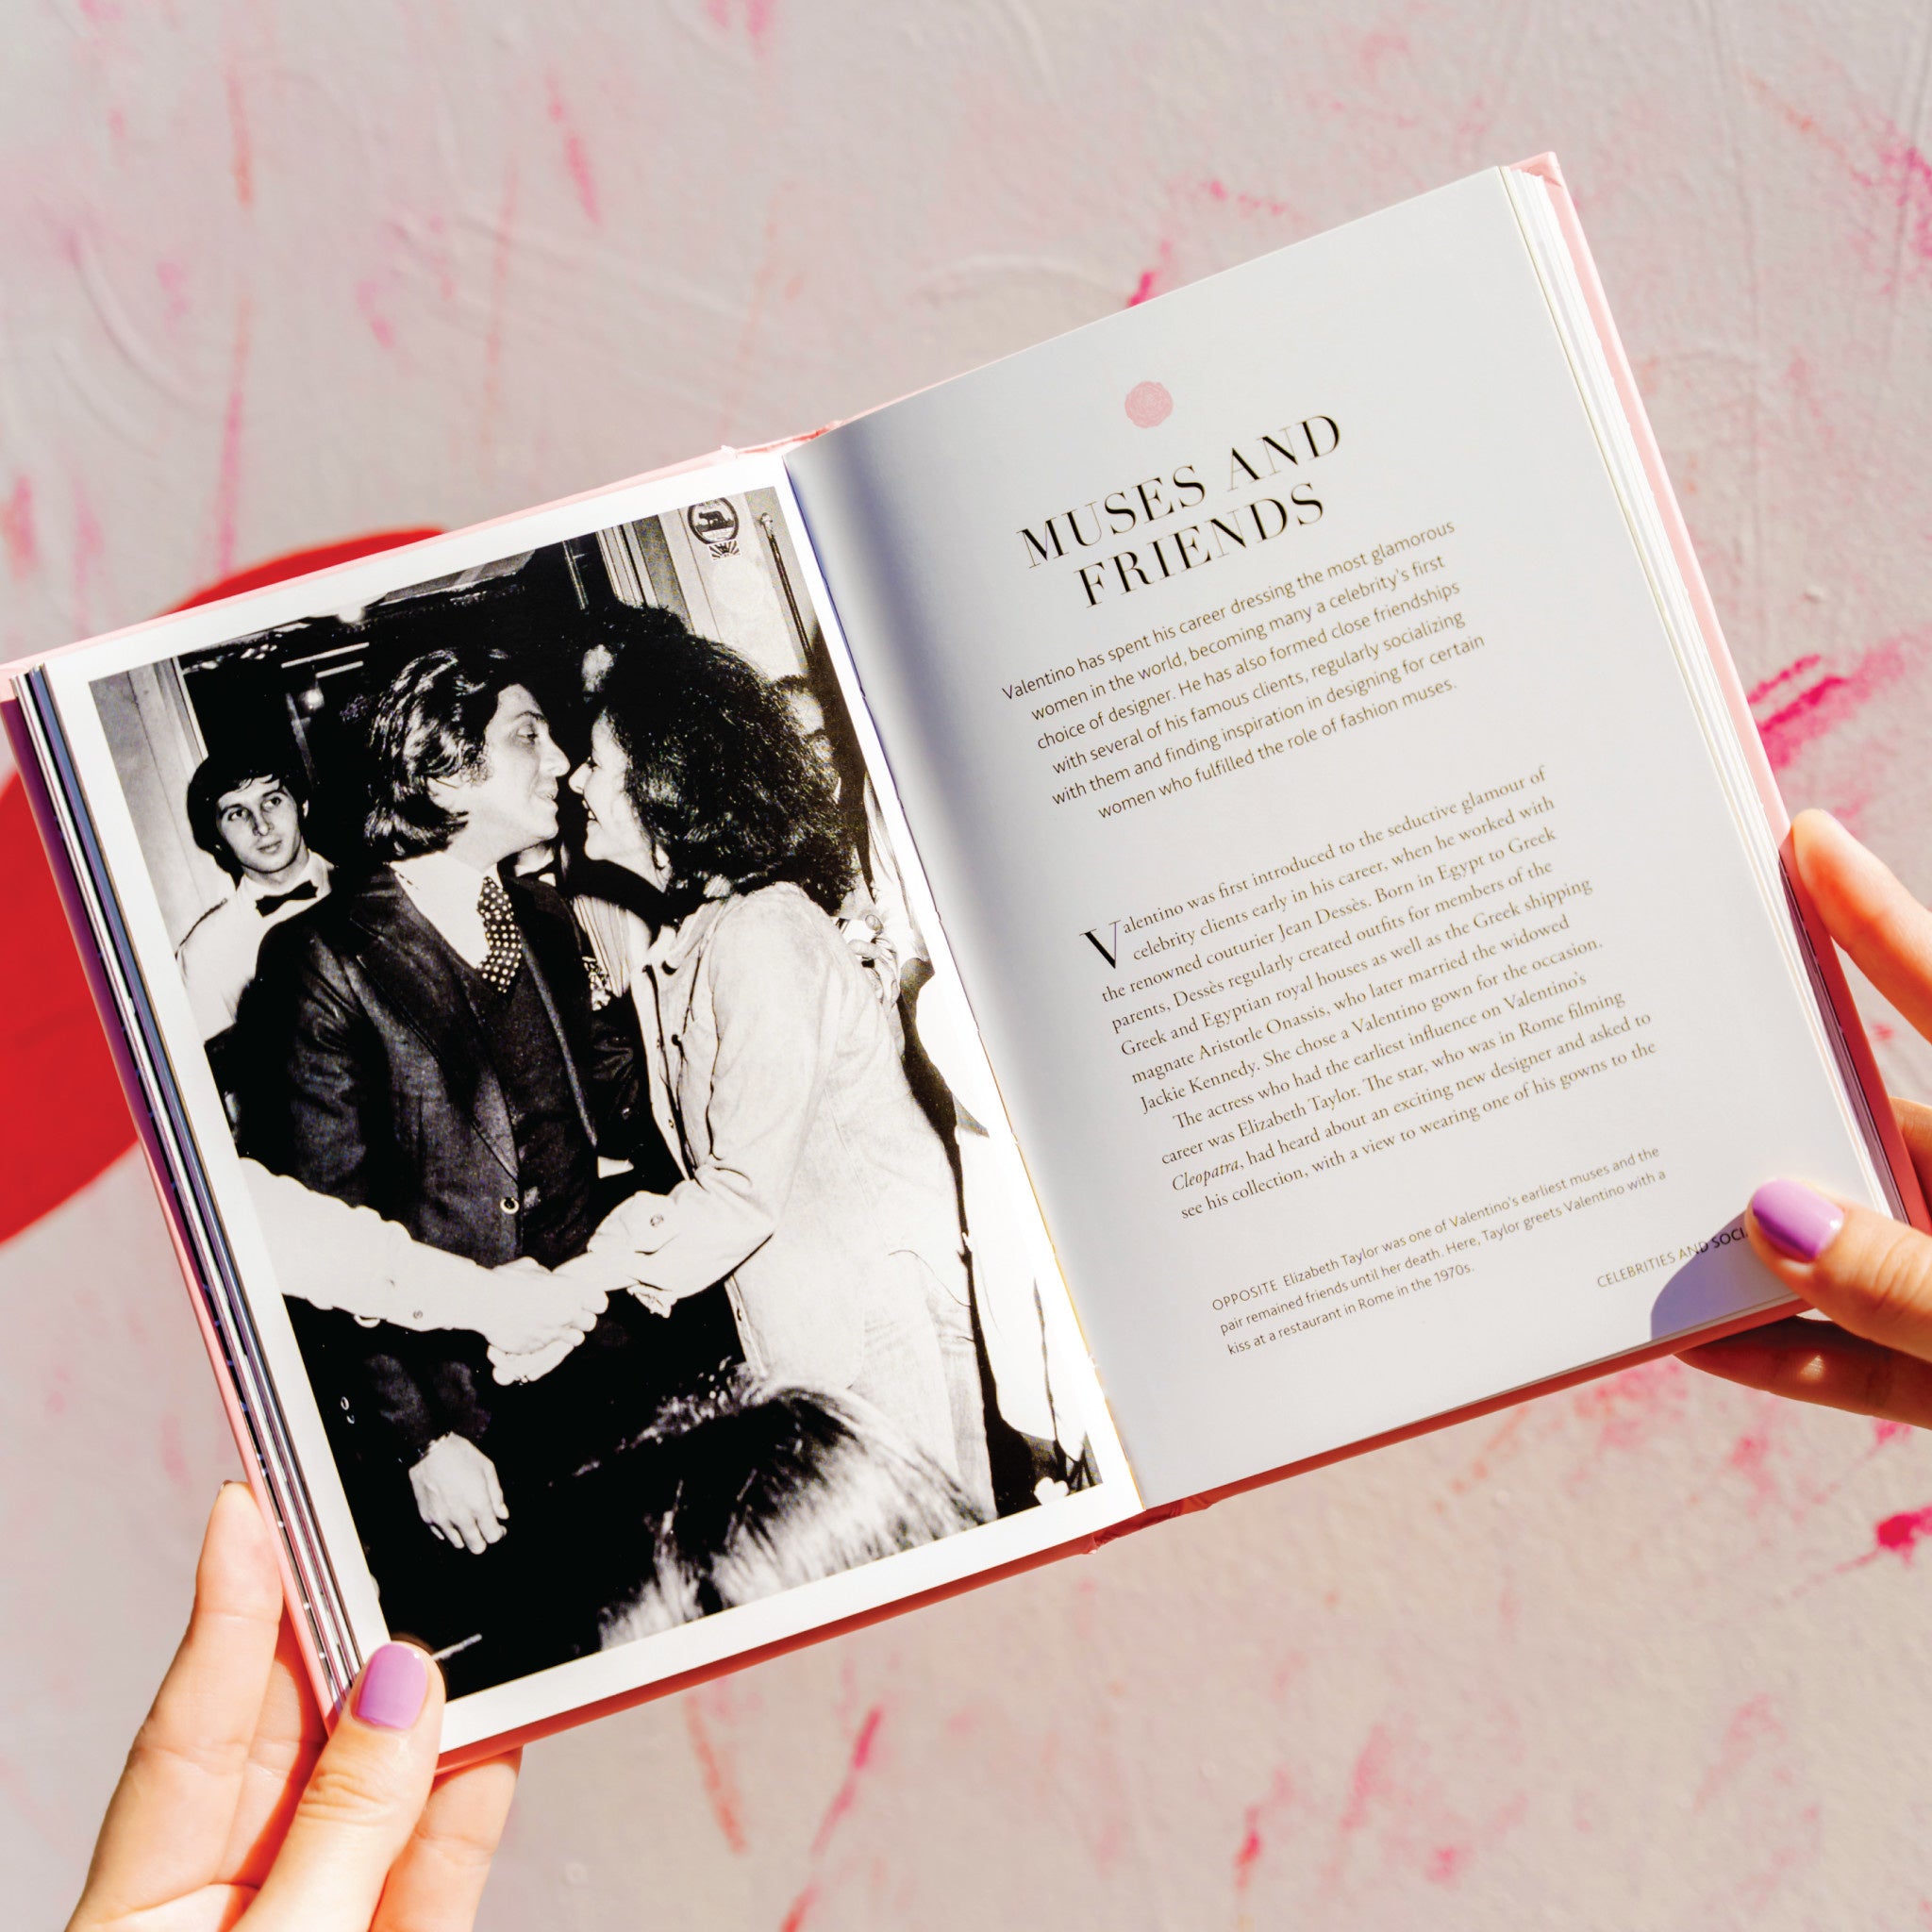 Little Book of Valentino: The Story of the Iconic Fashion House - Wynwood Walls Shop